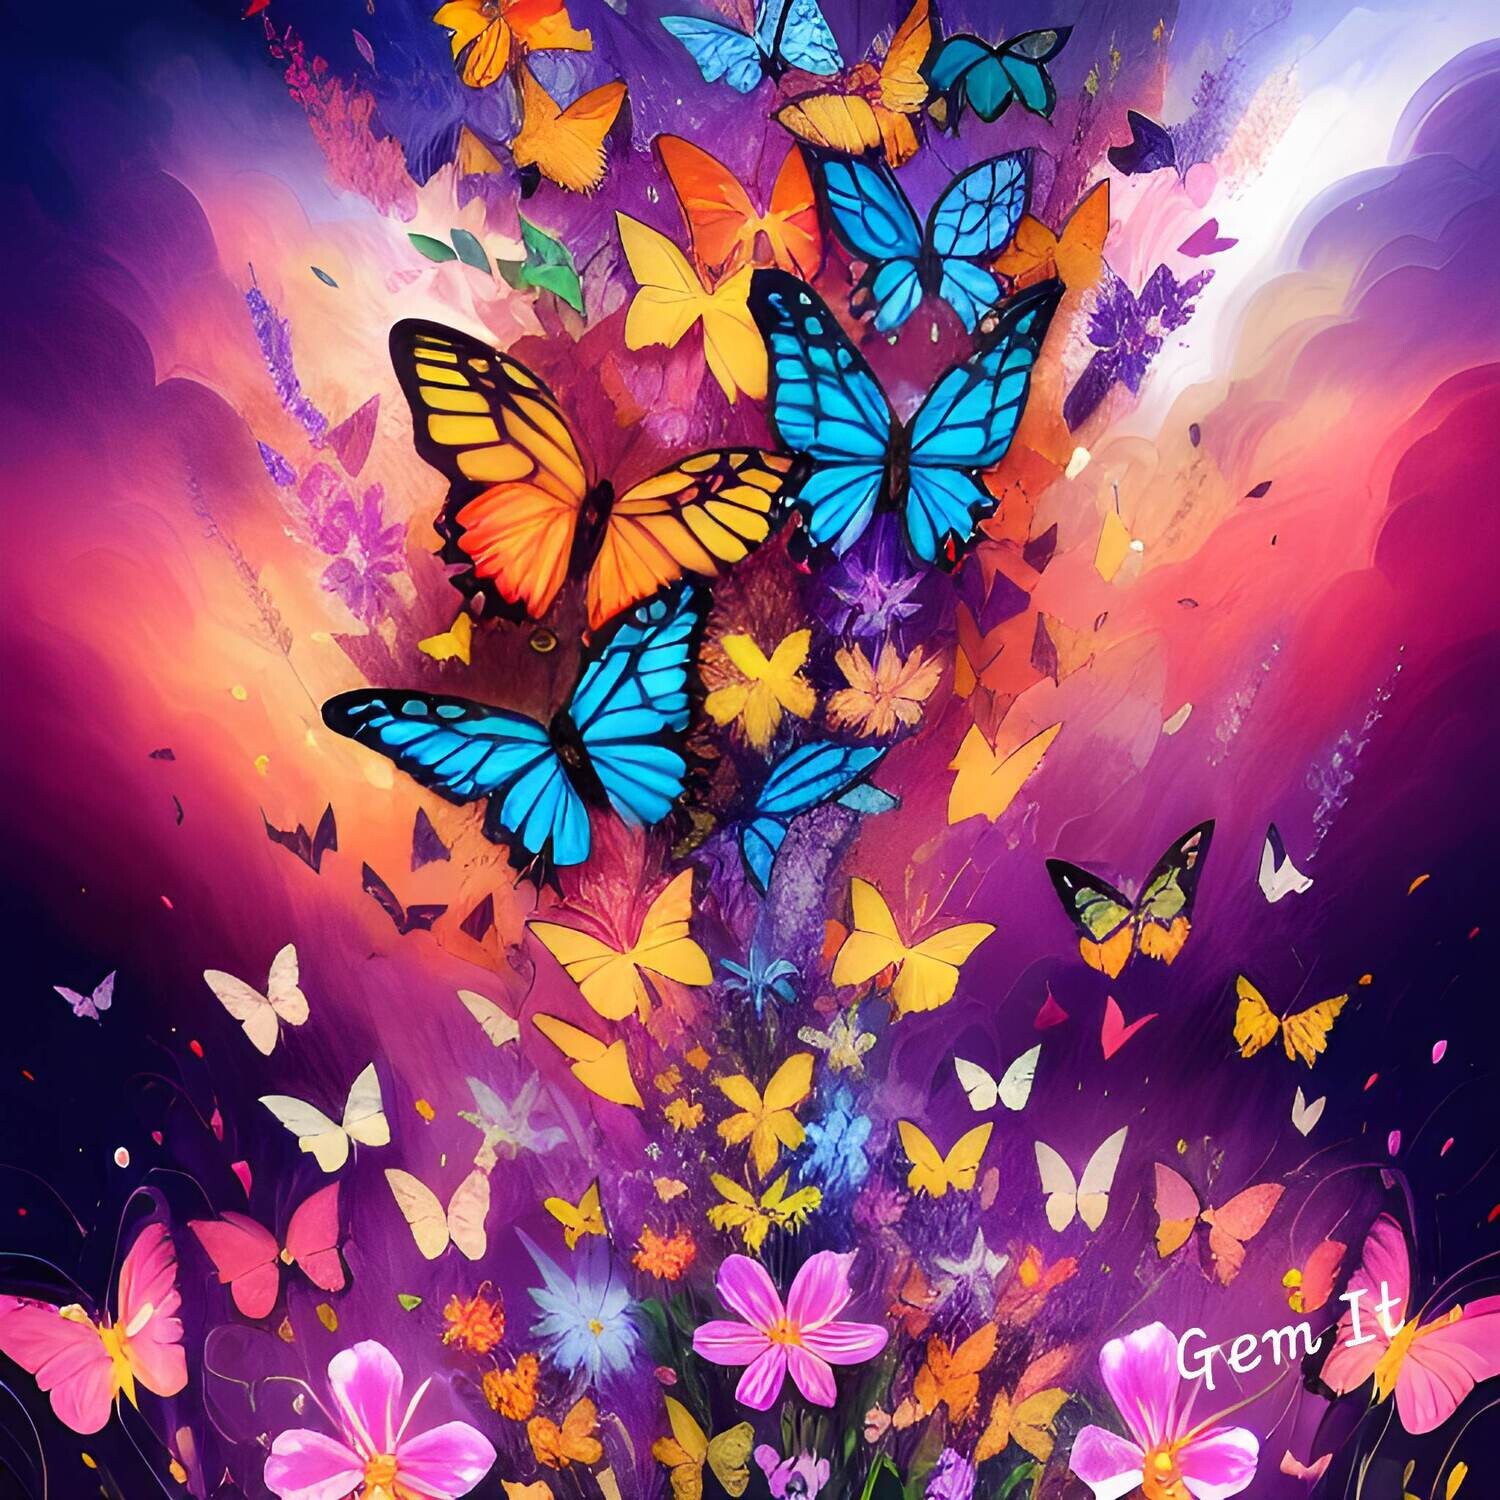 Butterflies 6812 - Full Drill Diamond Painting - Specially ordered for you. Delivery is approximately 4 - 6 weeks.